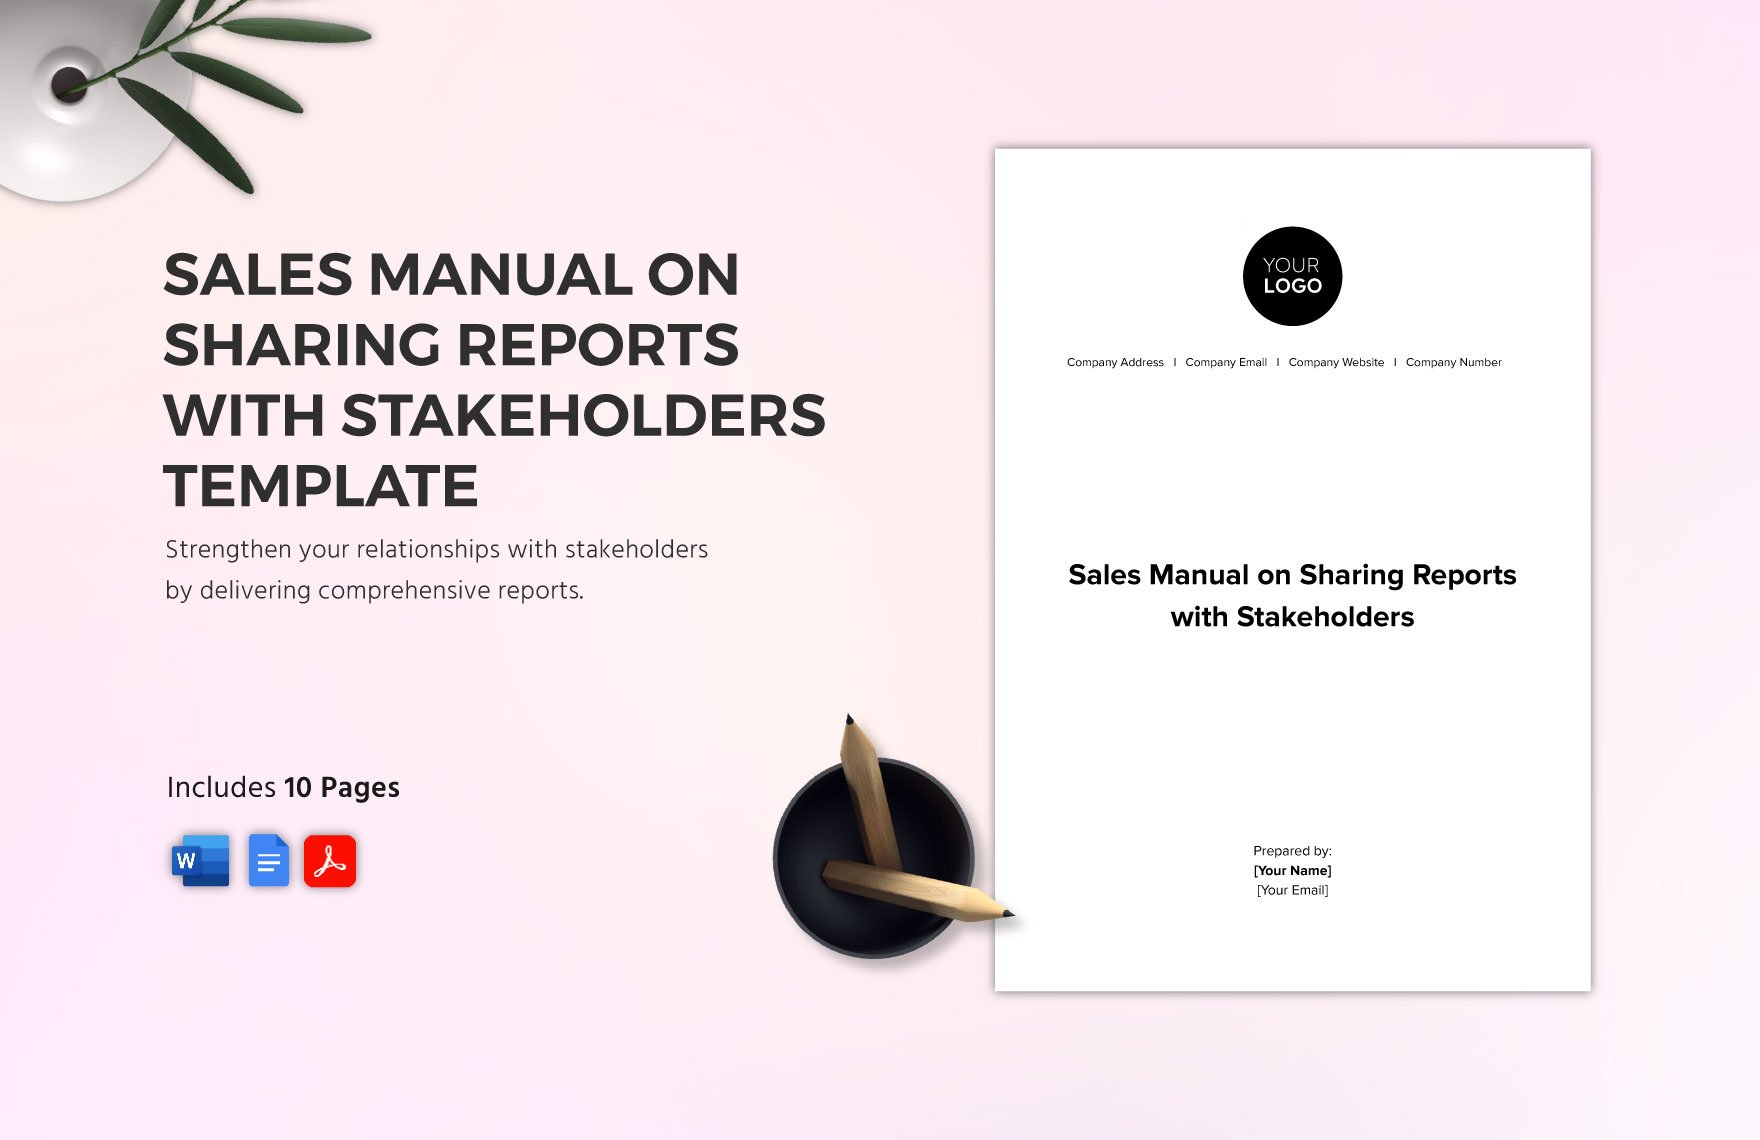 Sales Manual on Sharing Reports with Stakeholders Template